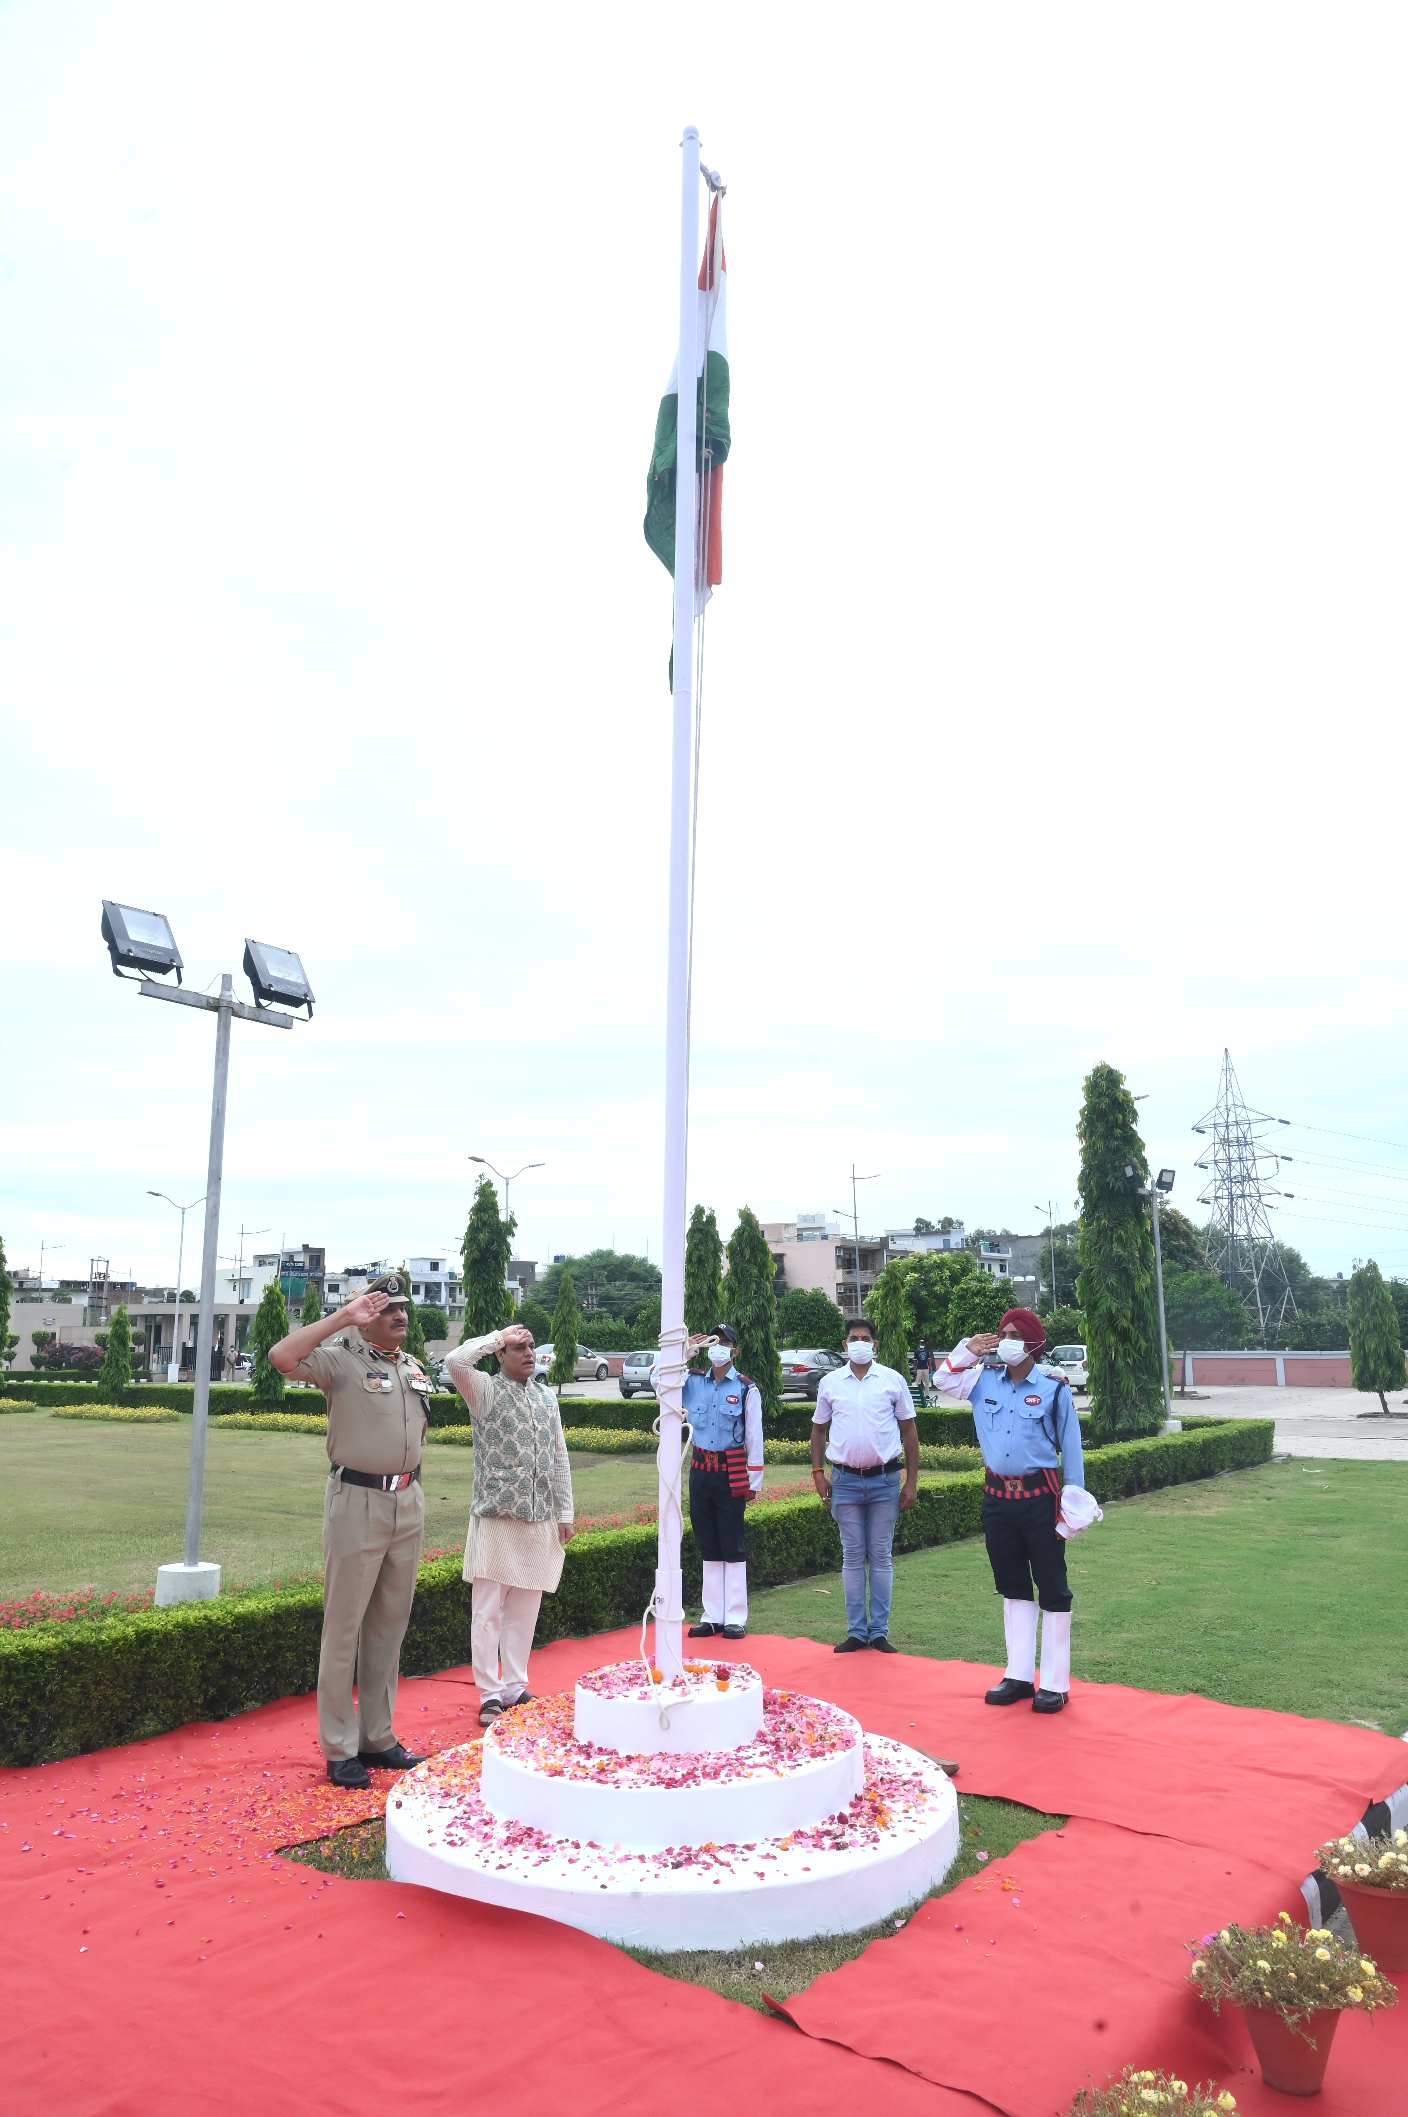 76th Independence Day celebration